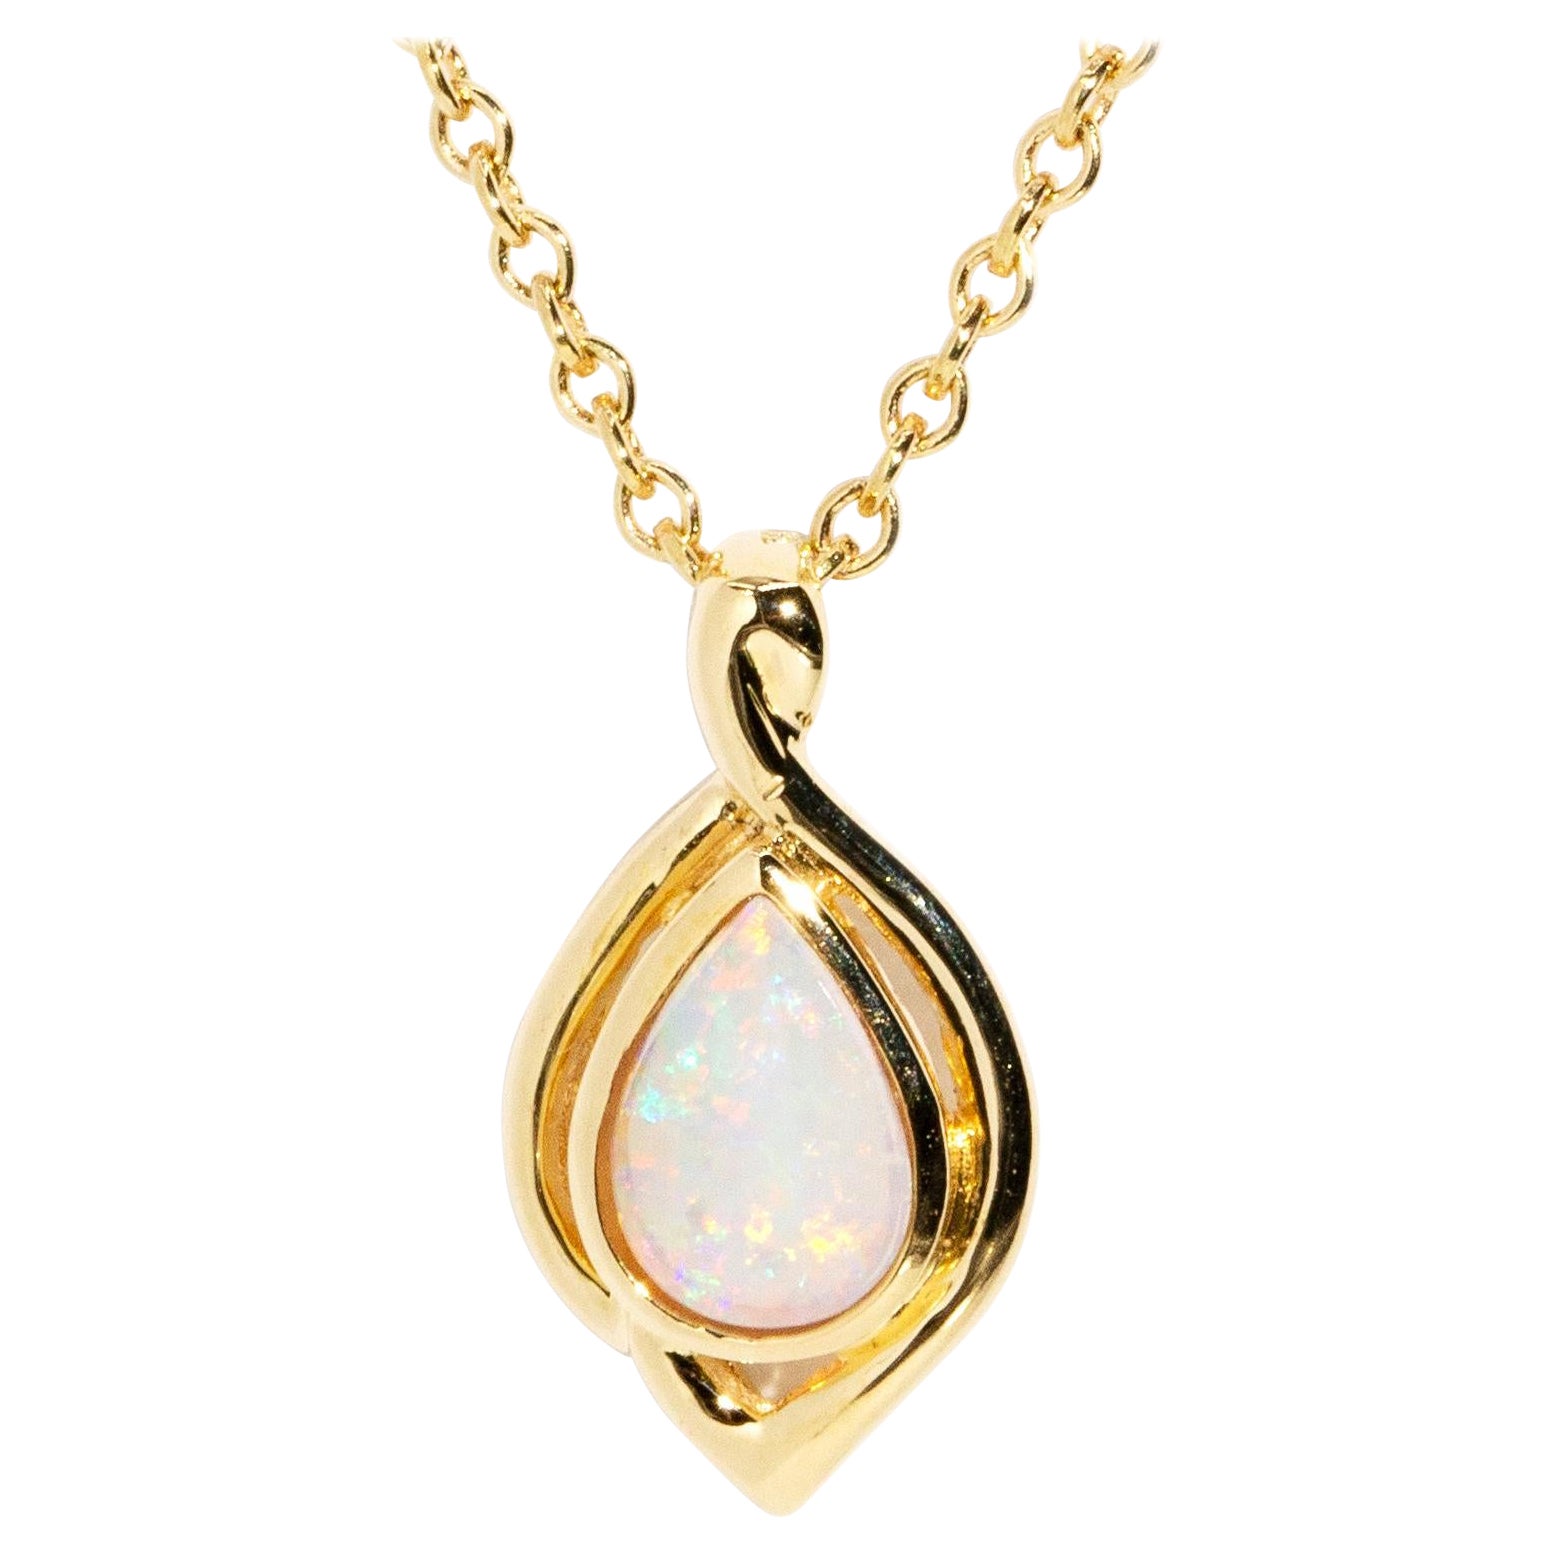 Vintage 1990s Solid Australian Crystal Opal Pendant & Chain 18 Carat Yellow Gold